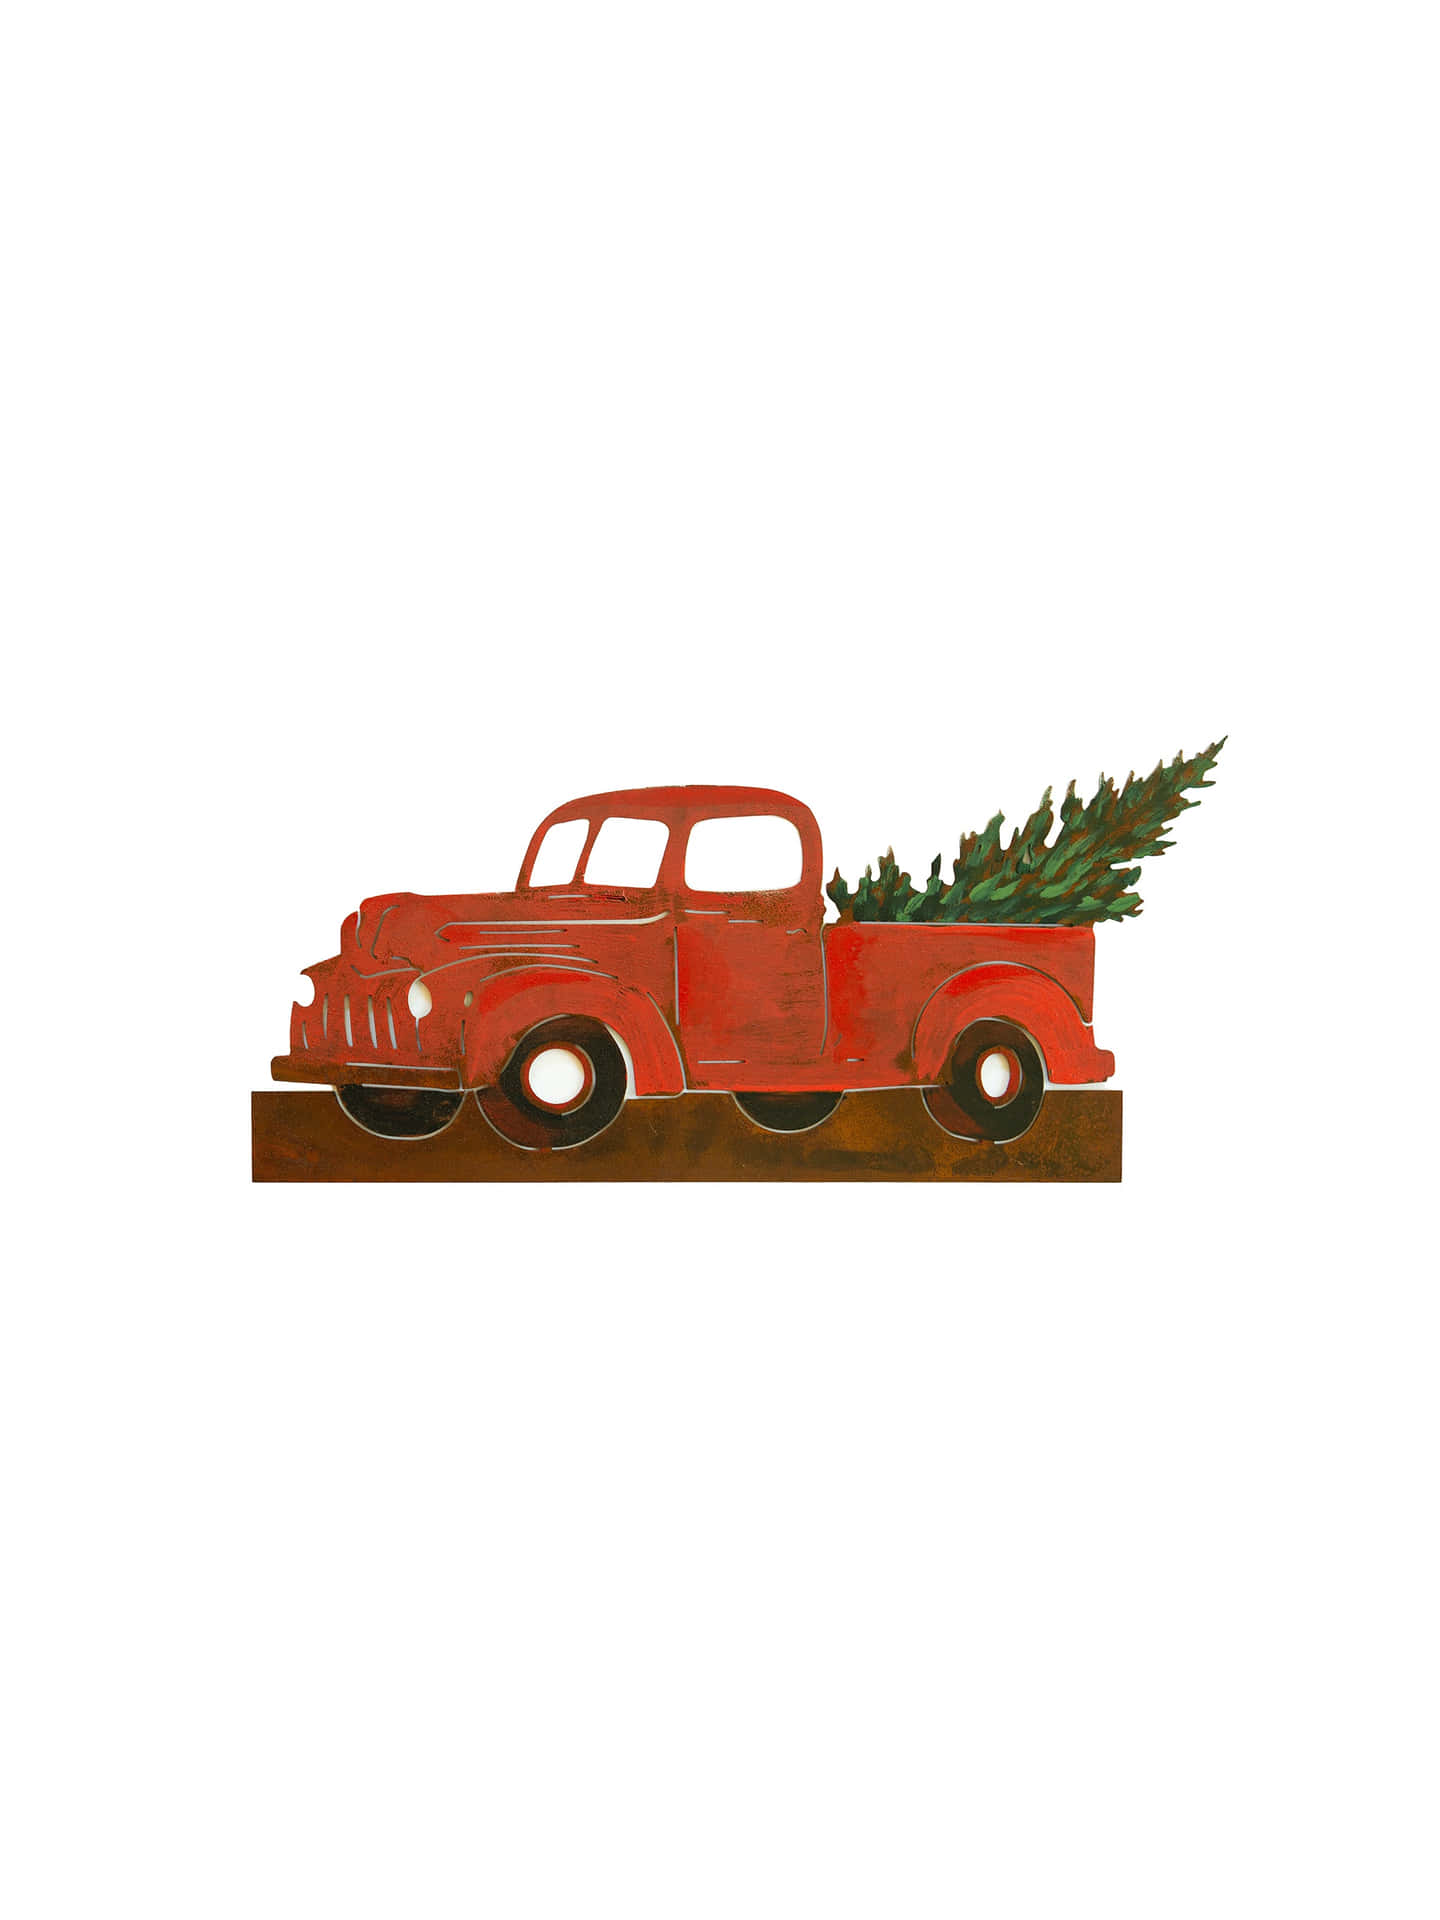 Celebrate the Holiday Season With This Vintage Truck Christmas Wallpaper